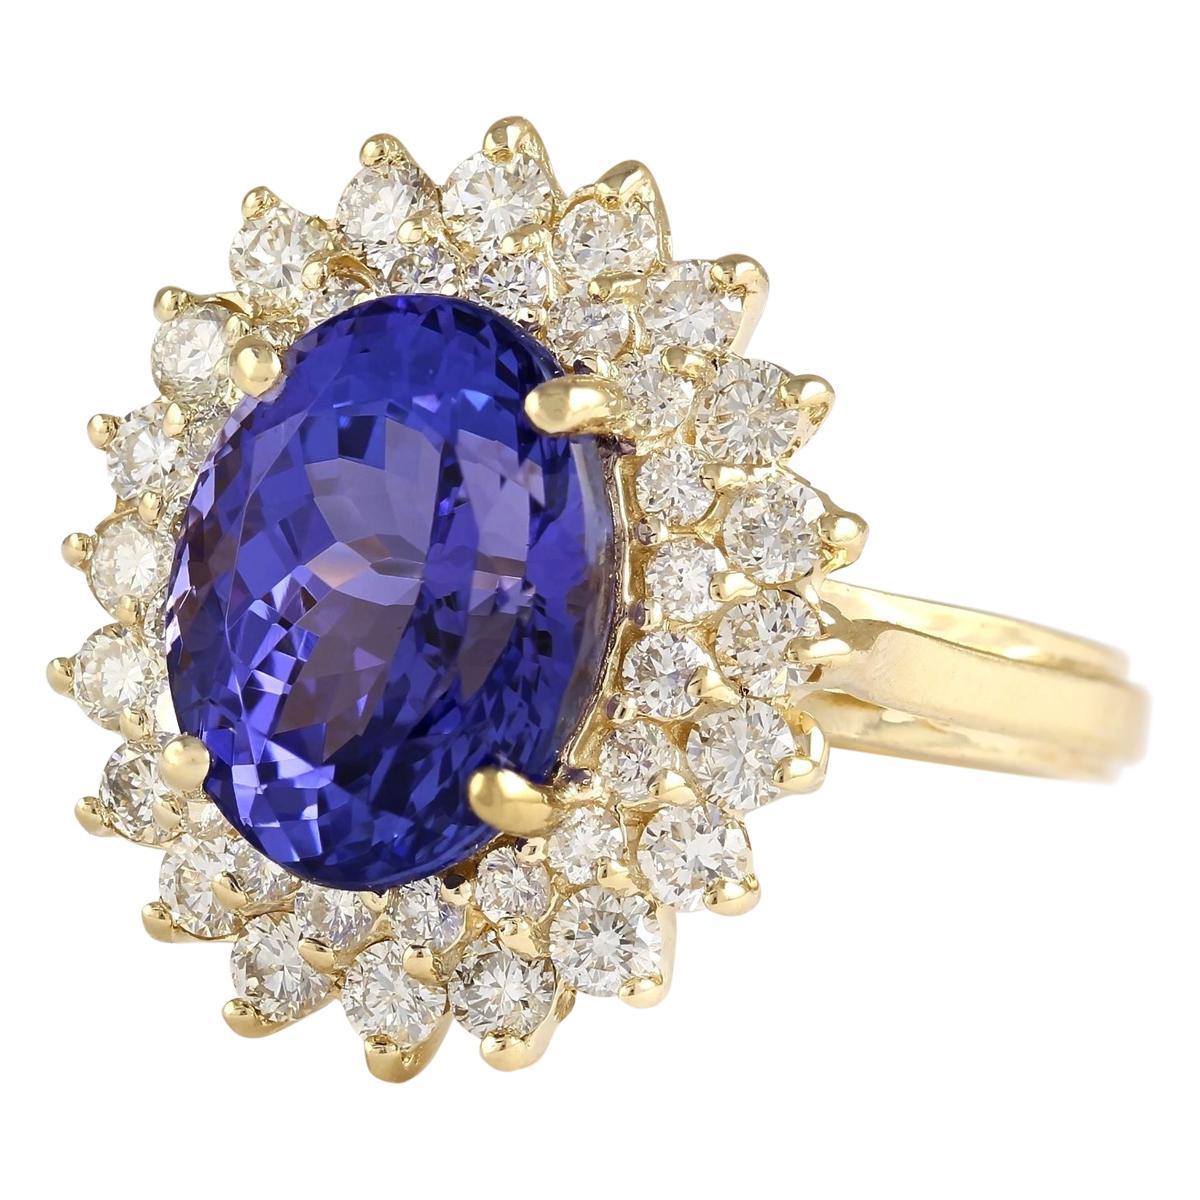 Stamped: 14K Yellow Gold
Total Ring Weight: 6.0 Grams
Total  Tanzanite Weight is 5.96 Carat (Measures: 12.00x10.00 mm)
Color: Blue
Total  Diamond Weight is 1.30 Carat
Color: F-G, Clarity: VS2-SI1
Face Measures: 19.65x17.12 mm
Sku: [704130W]
